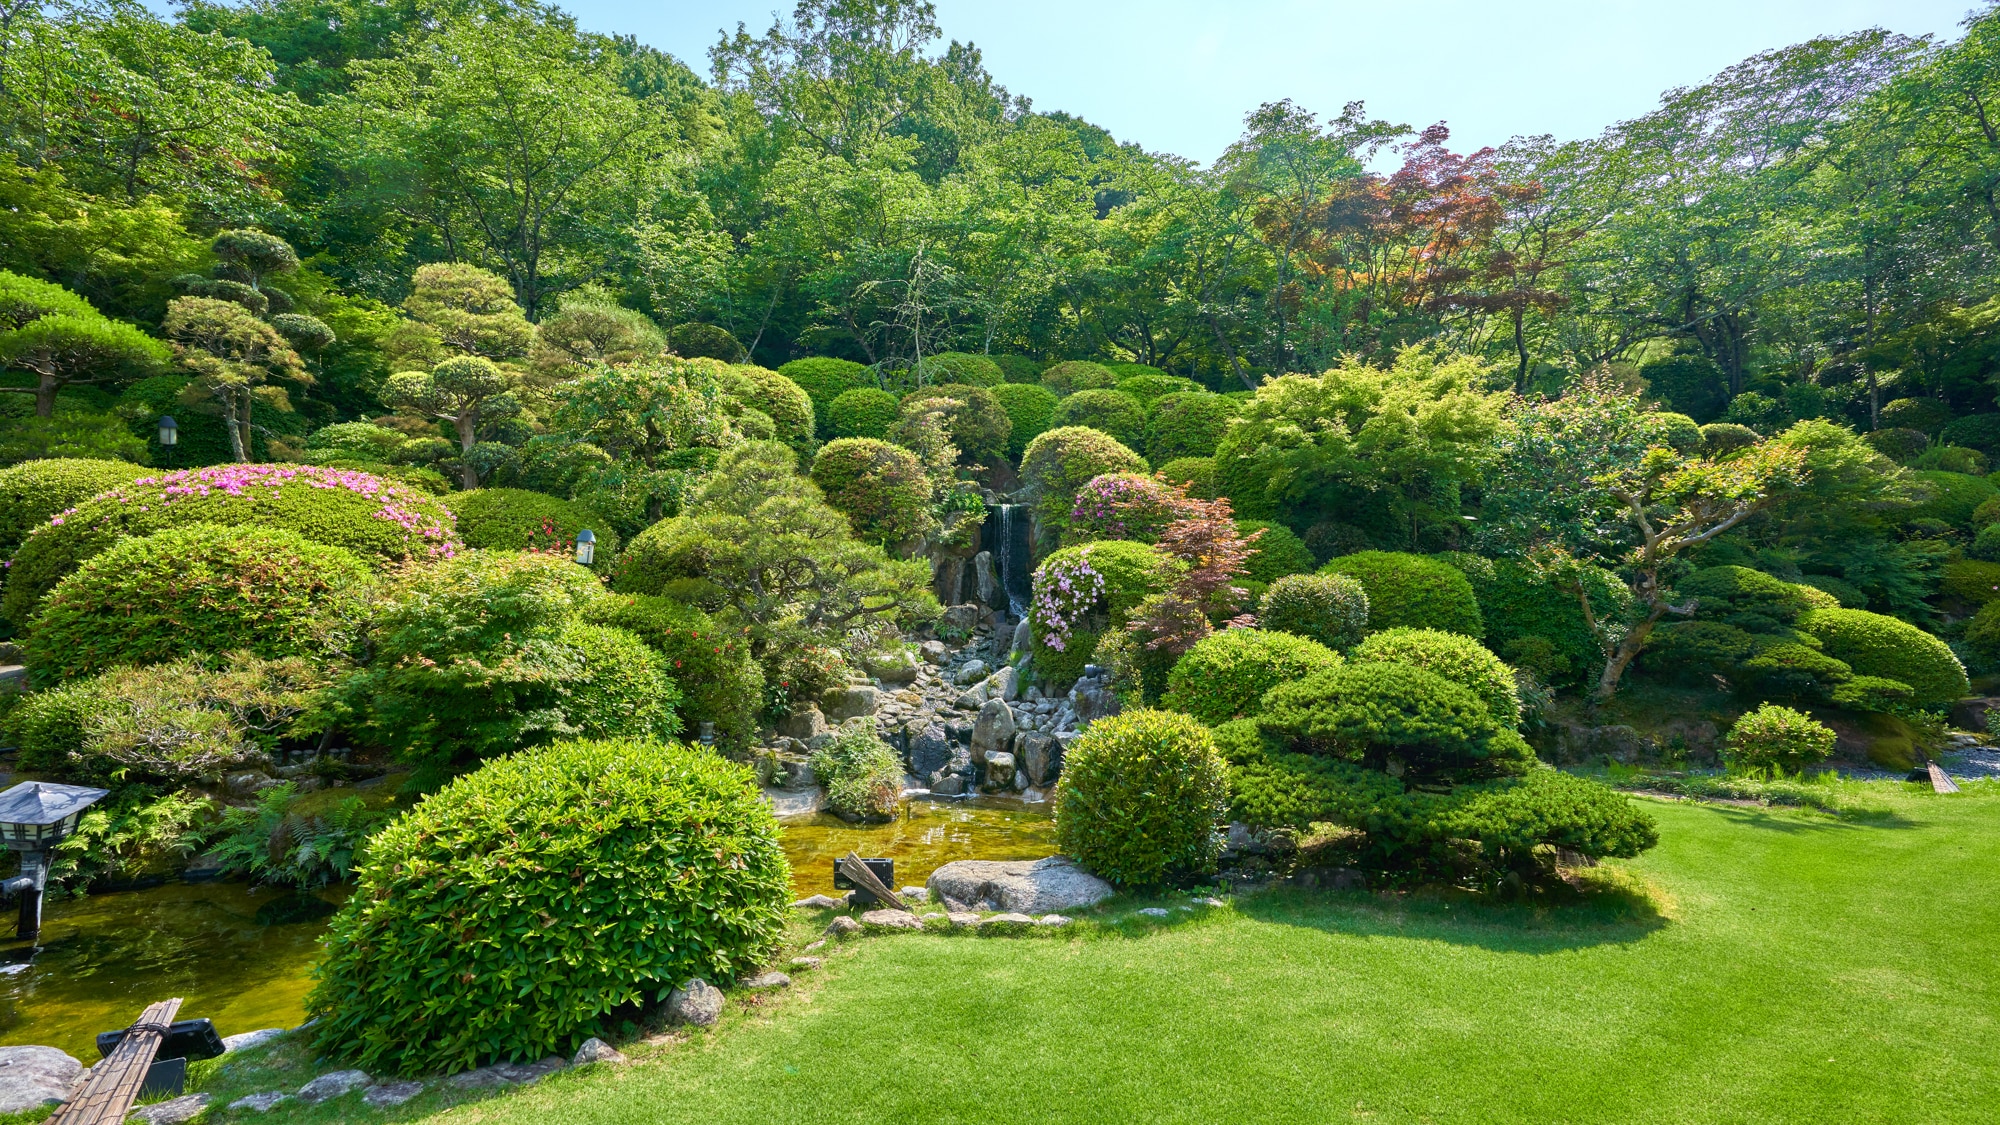  A Japanese garden that looks like a painting spreads out in front of you.